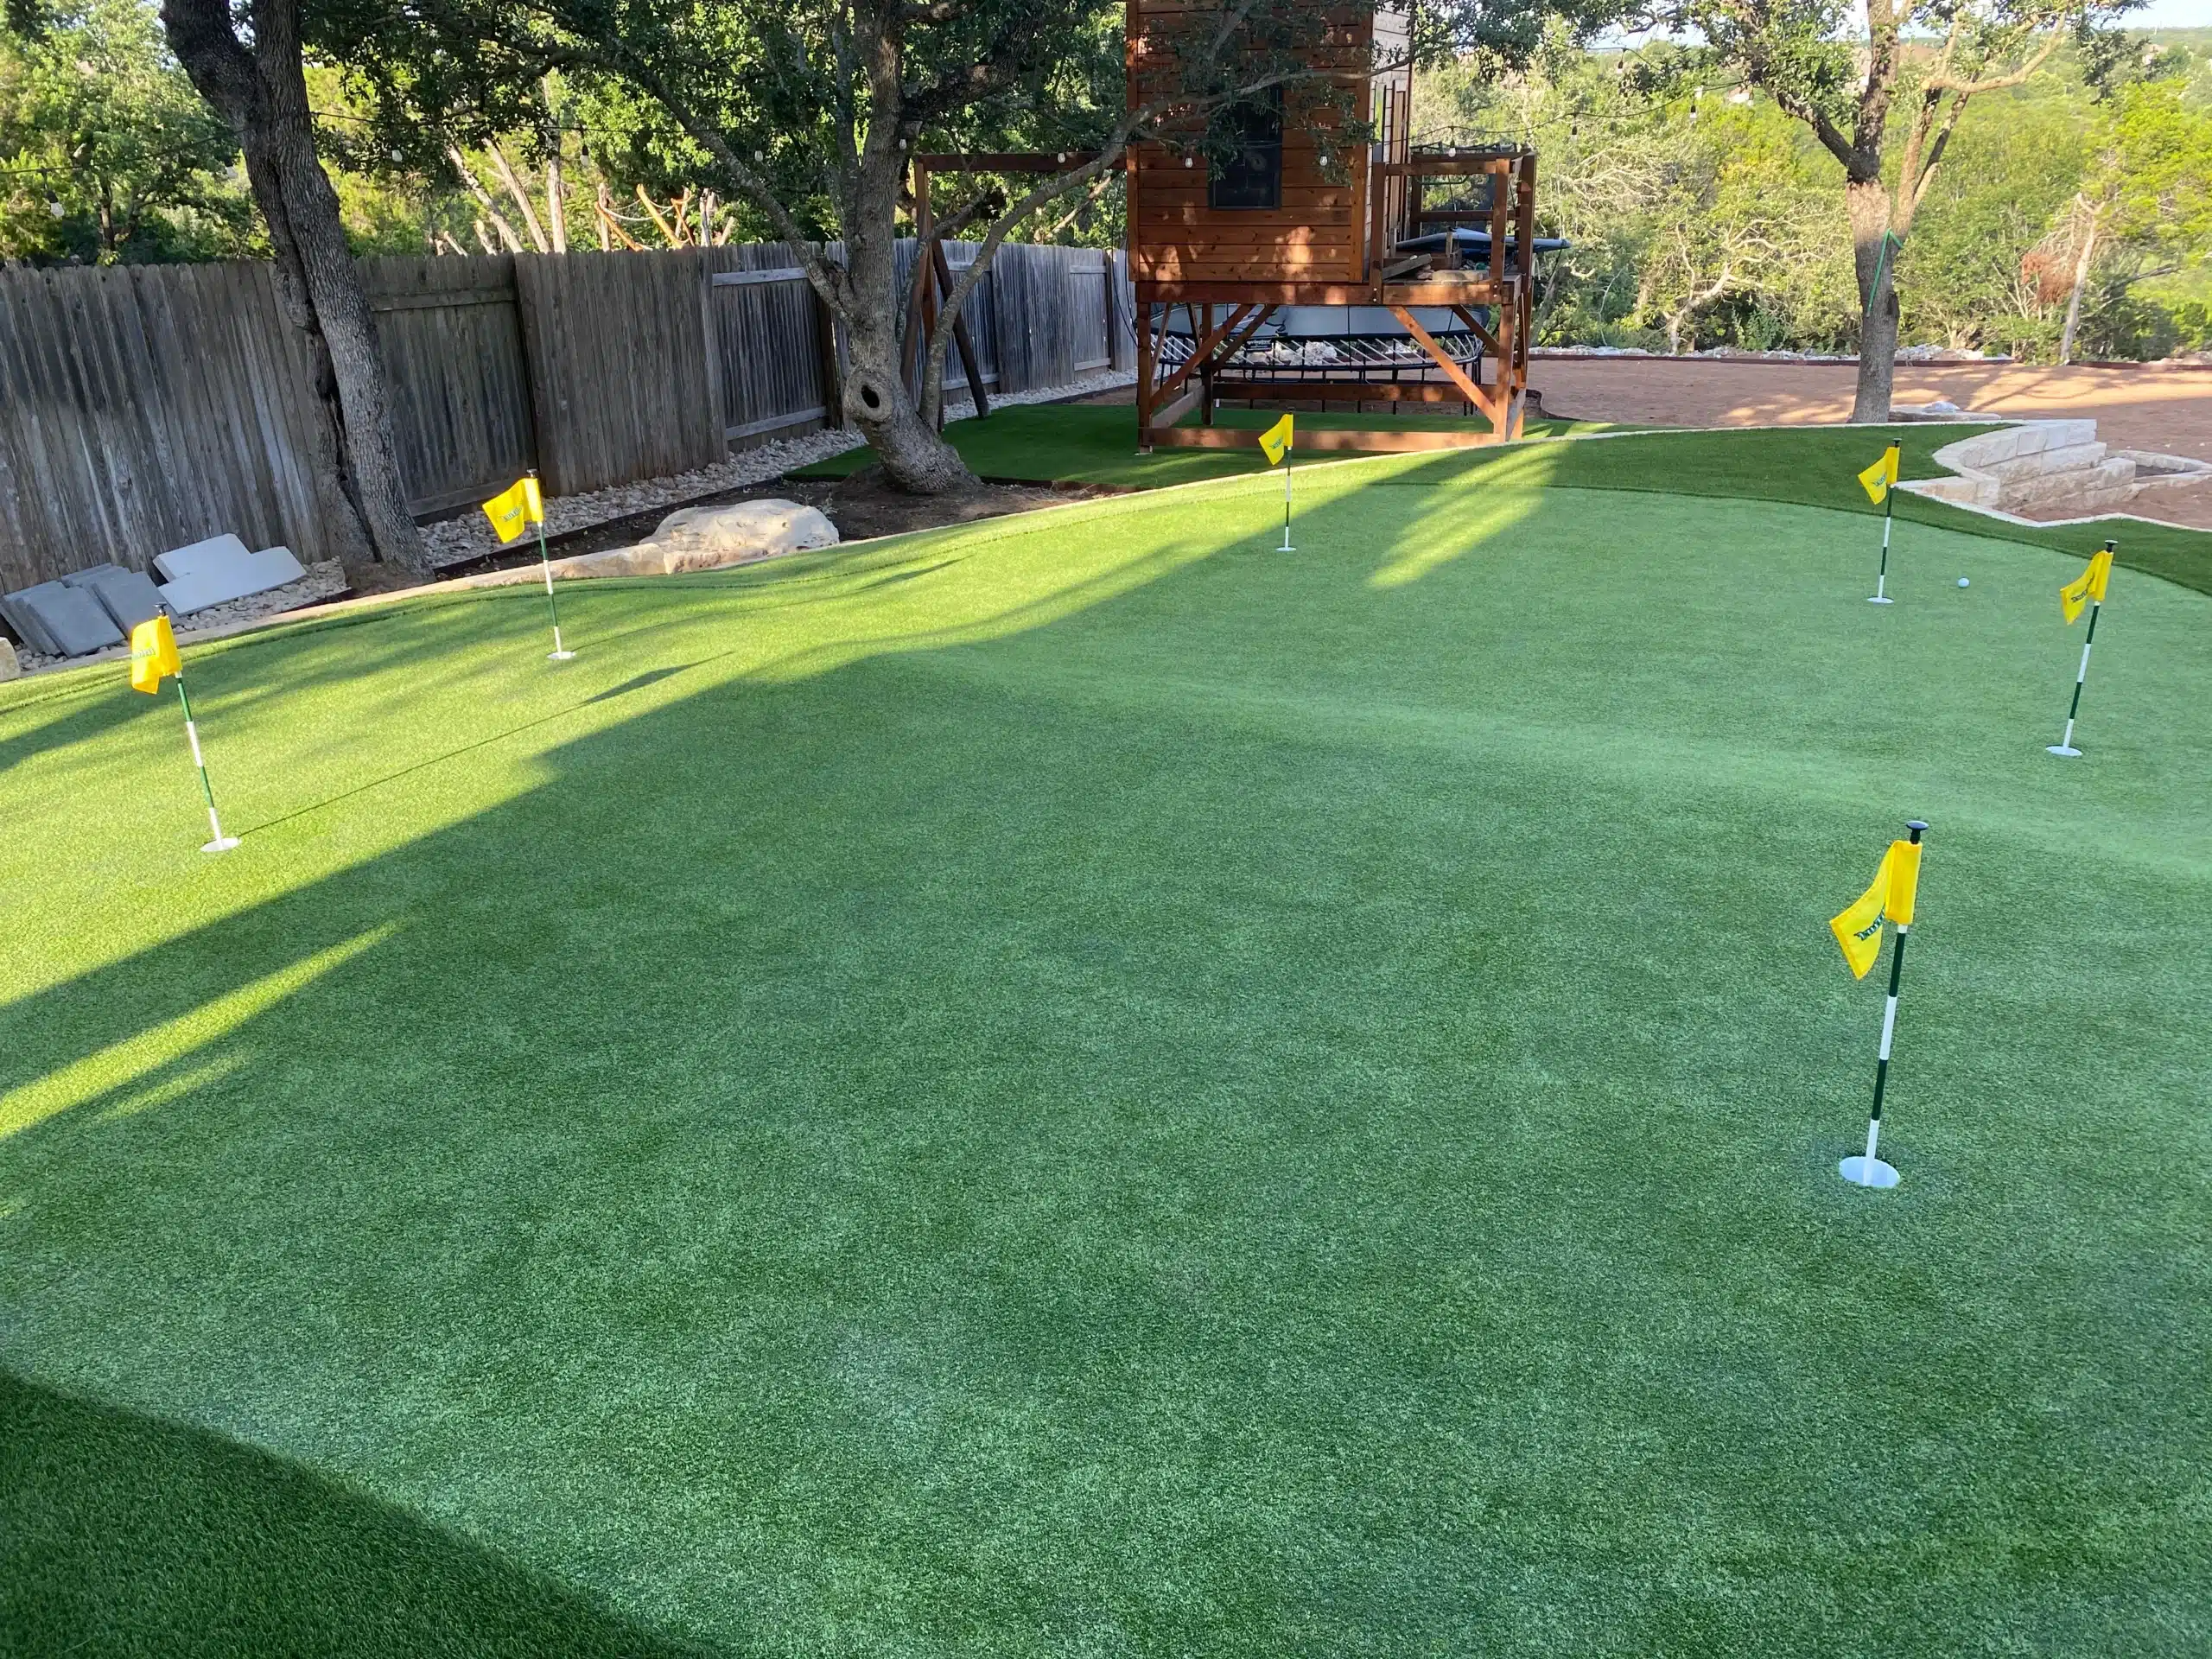 mini golf and turf in backyard of central texas home